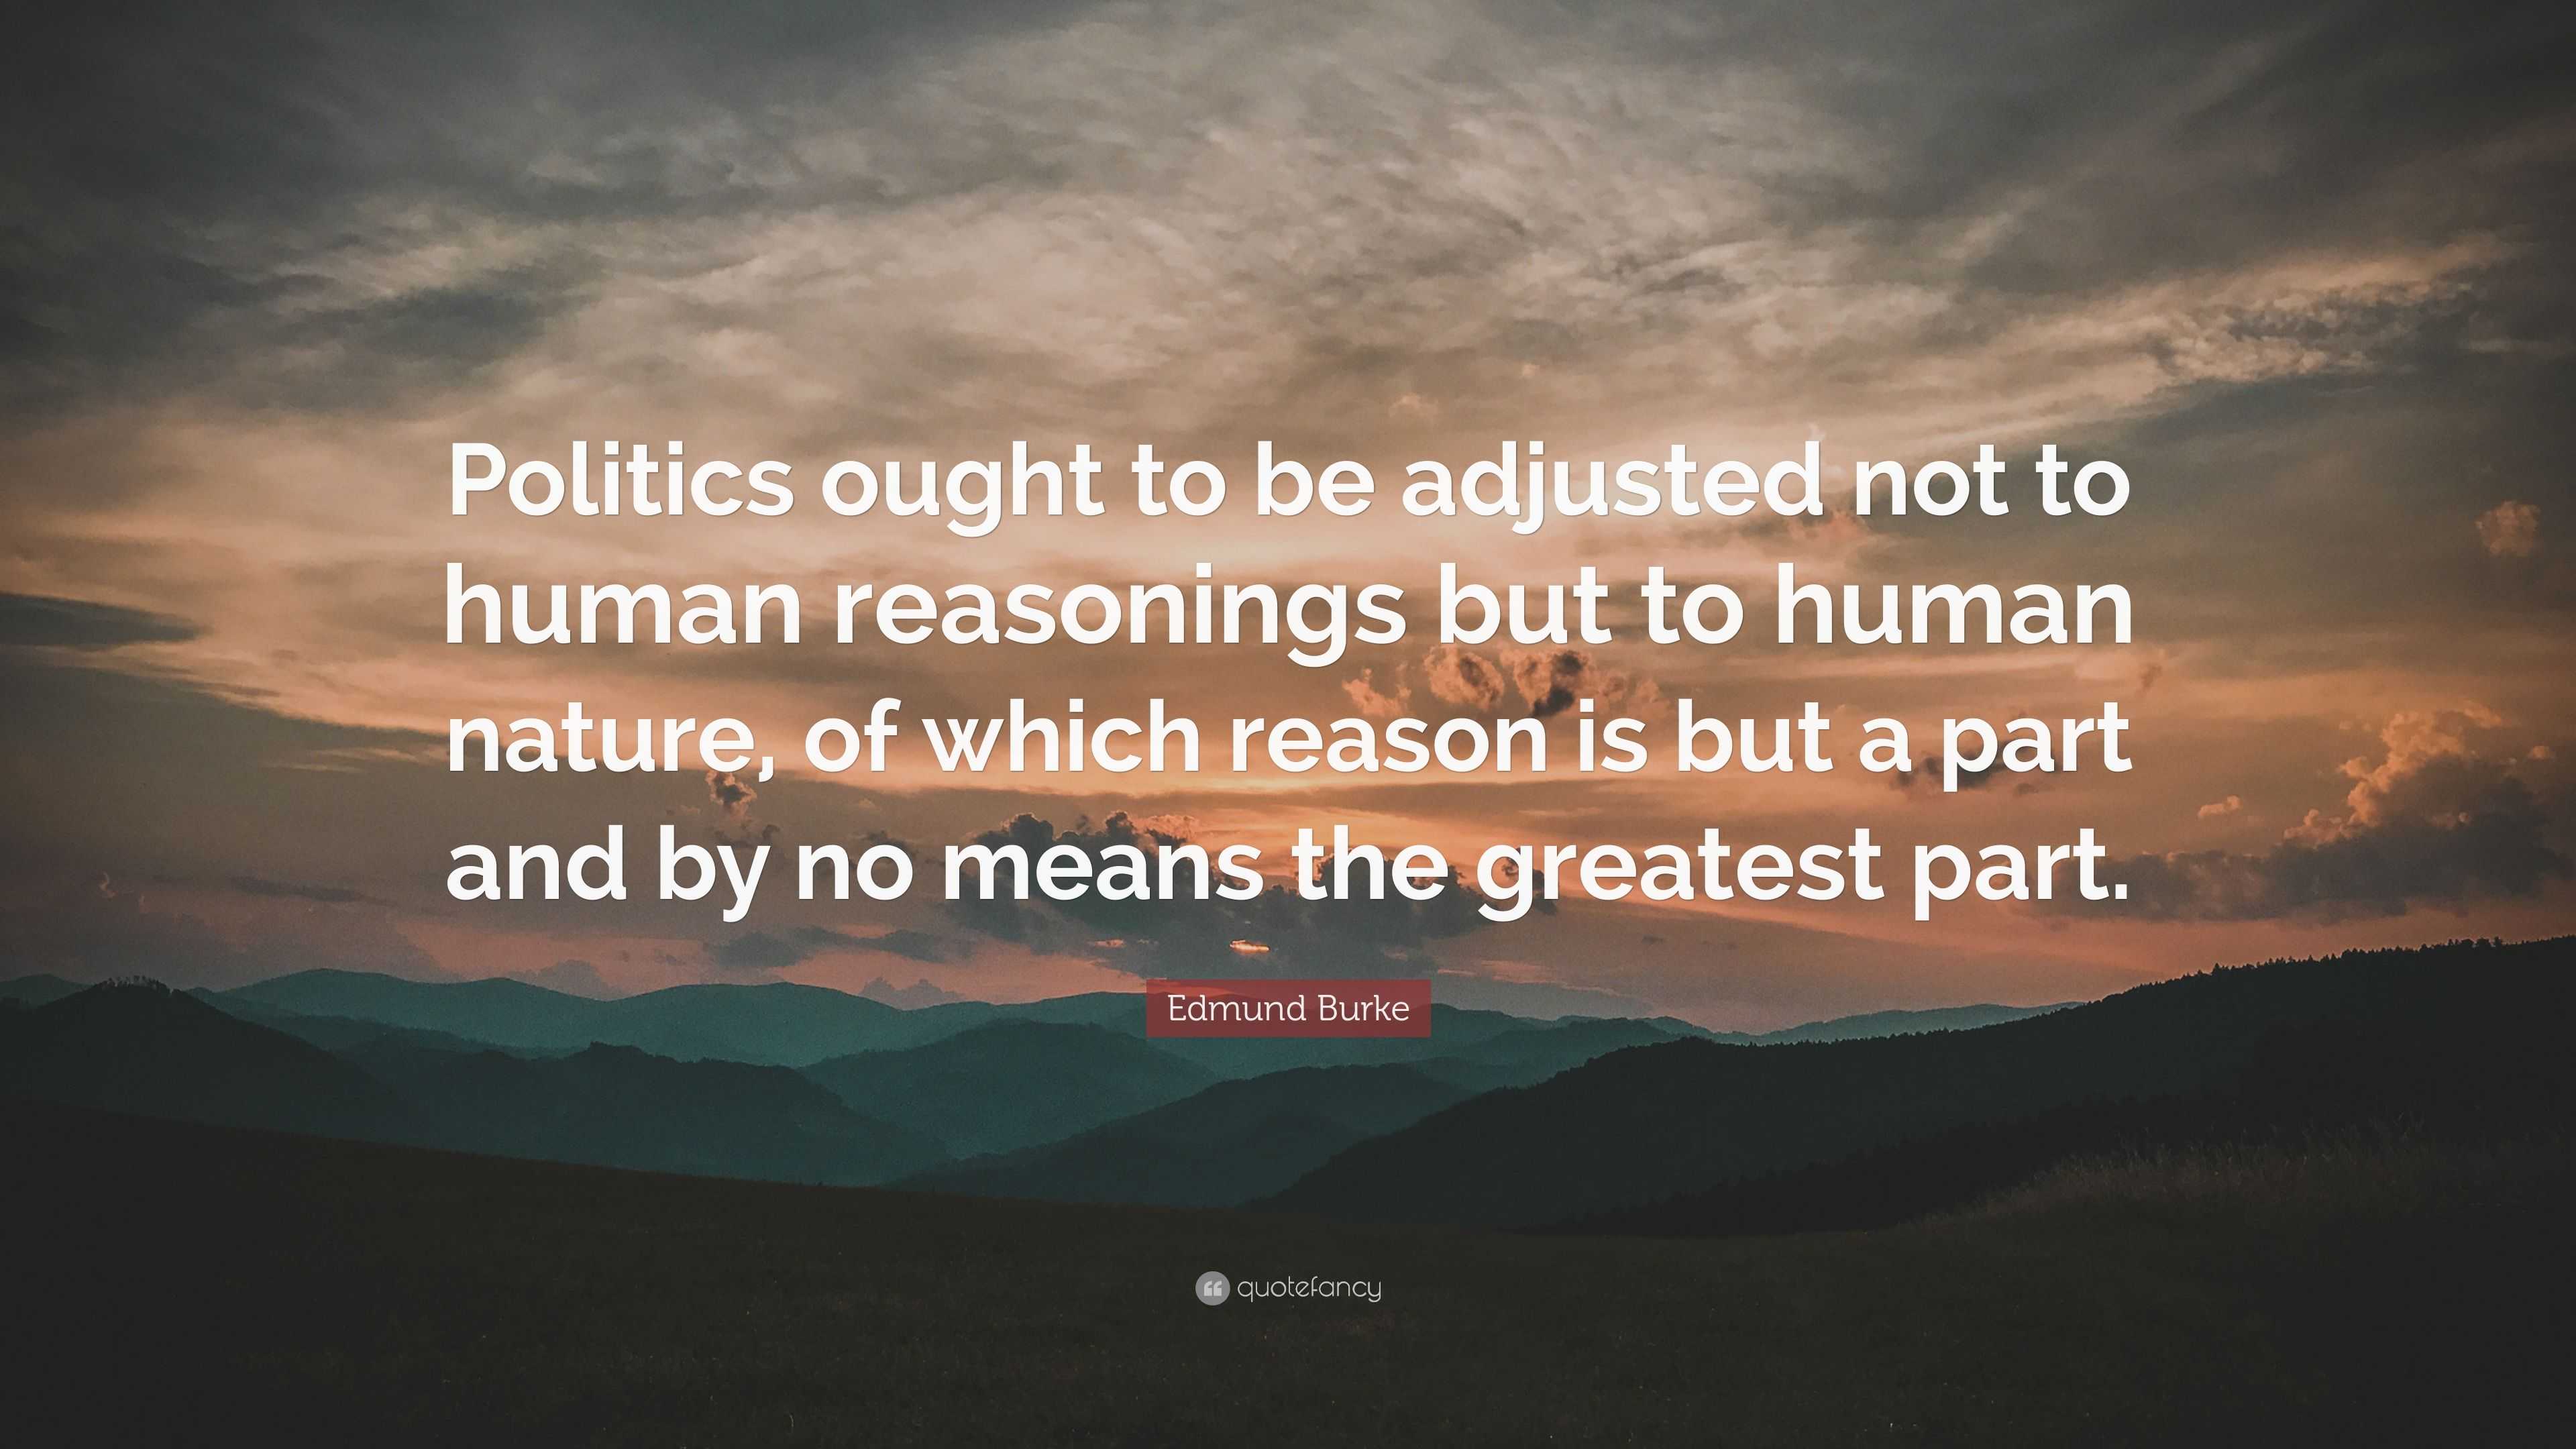 Edmund Burke Quote Politics Ought To Be Adjusted Not To Human Reasonings But To Human Nature Of Which Reason Is But A Part And By No Means 10 Wallpapers Quotefancy